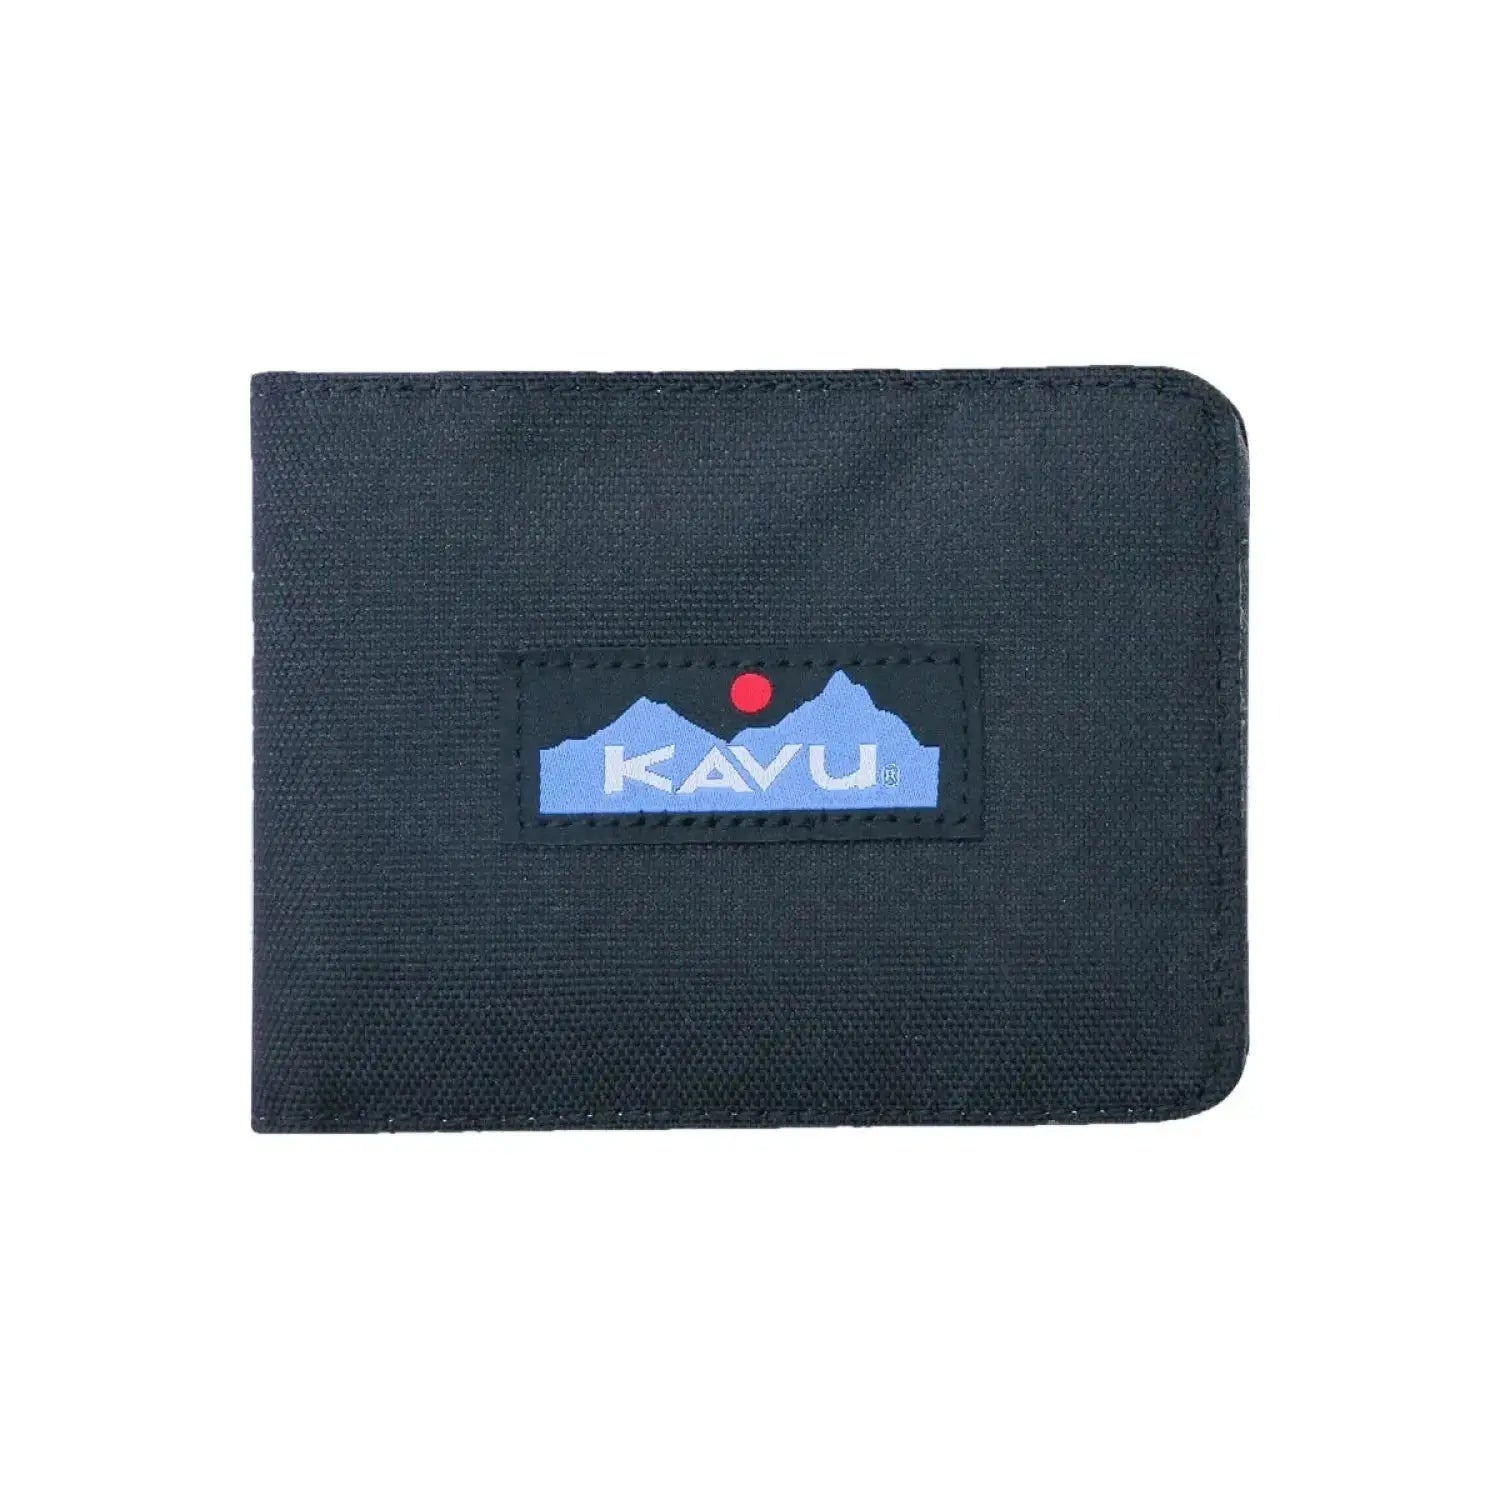 Kavu Watershed Wallet in jet black color, front view with Kavu Logo.